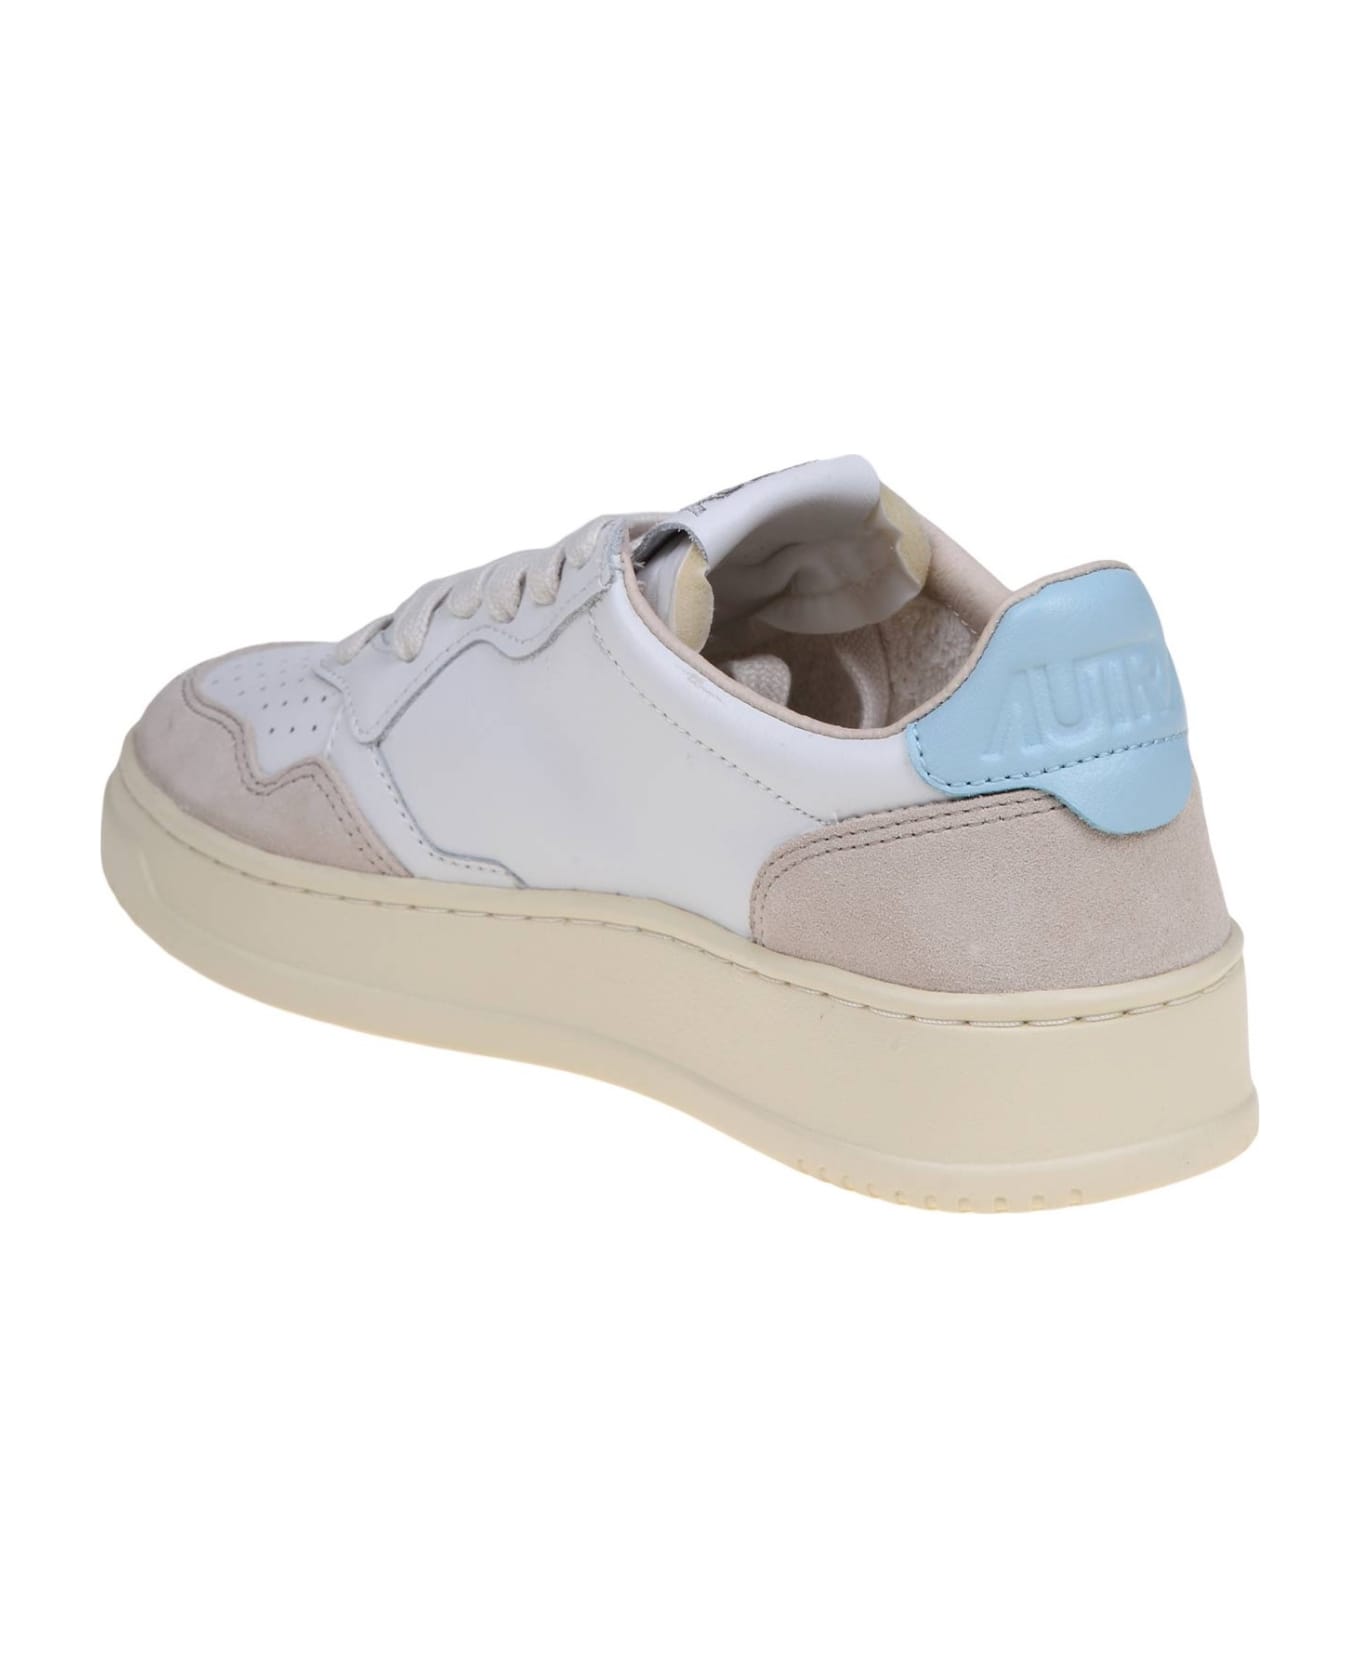 Autry Medalist Low Sneakers - white/blue スニーカー